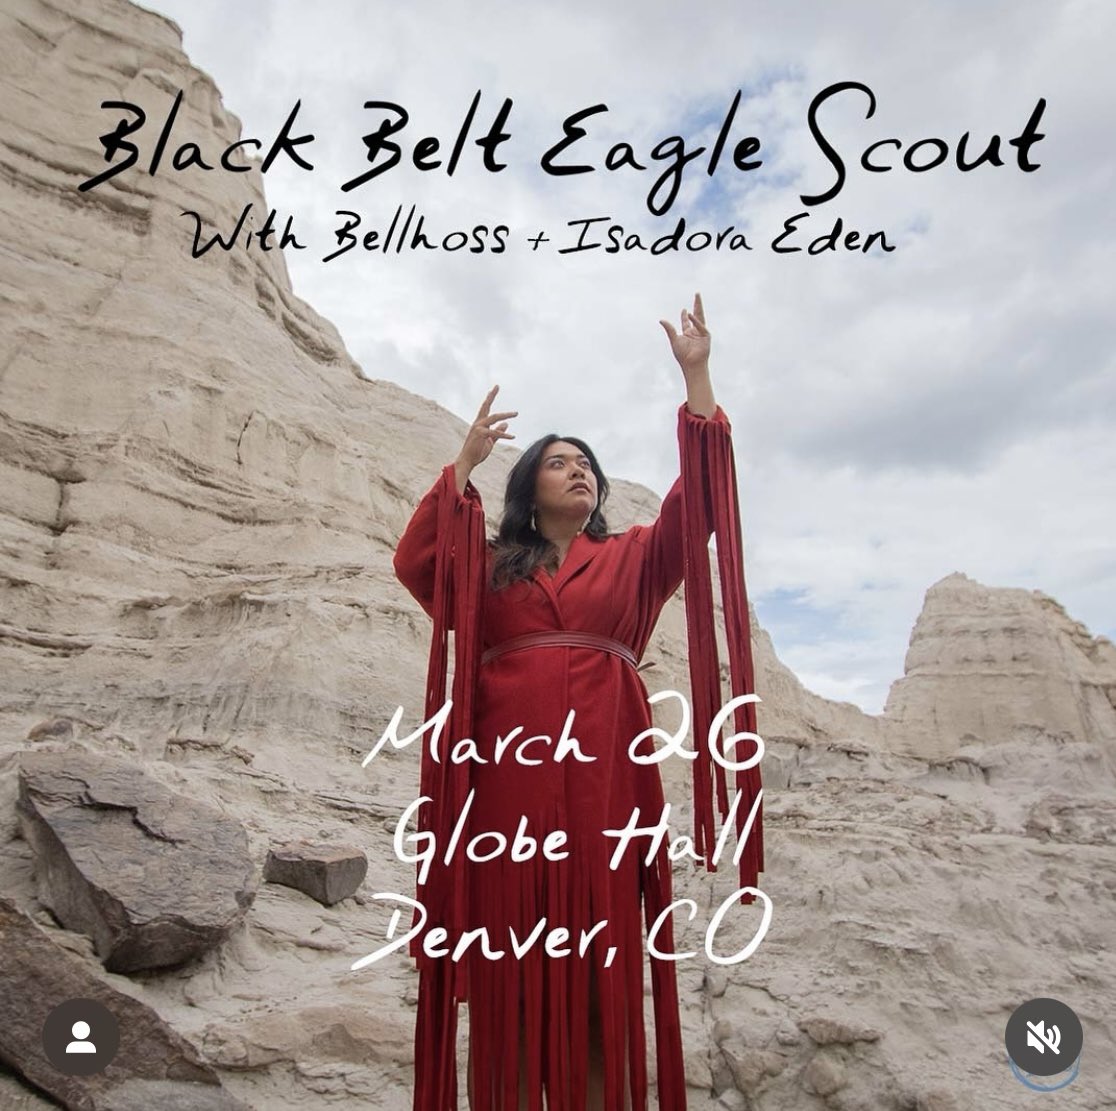 Bellhoss with Black Belt Eagle Scout and Isadora Eden tonight @ Globe Hall Denver. I’ll be selling moich